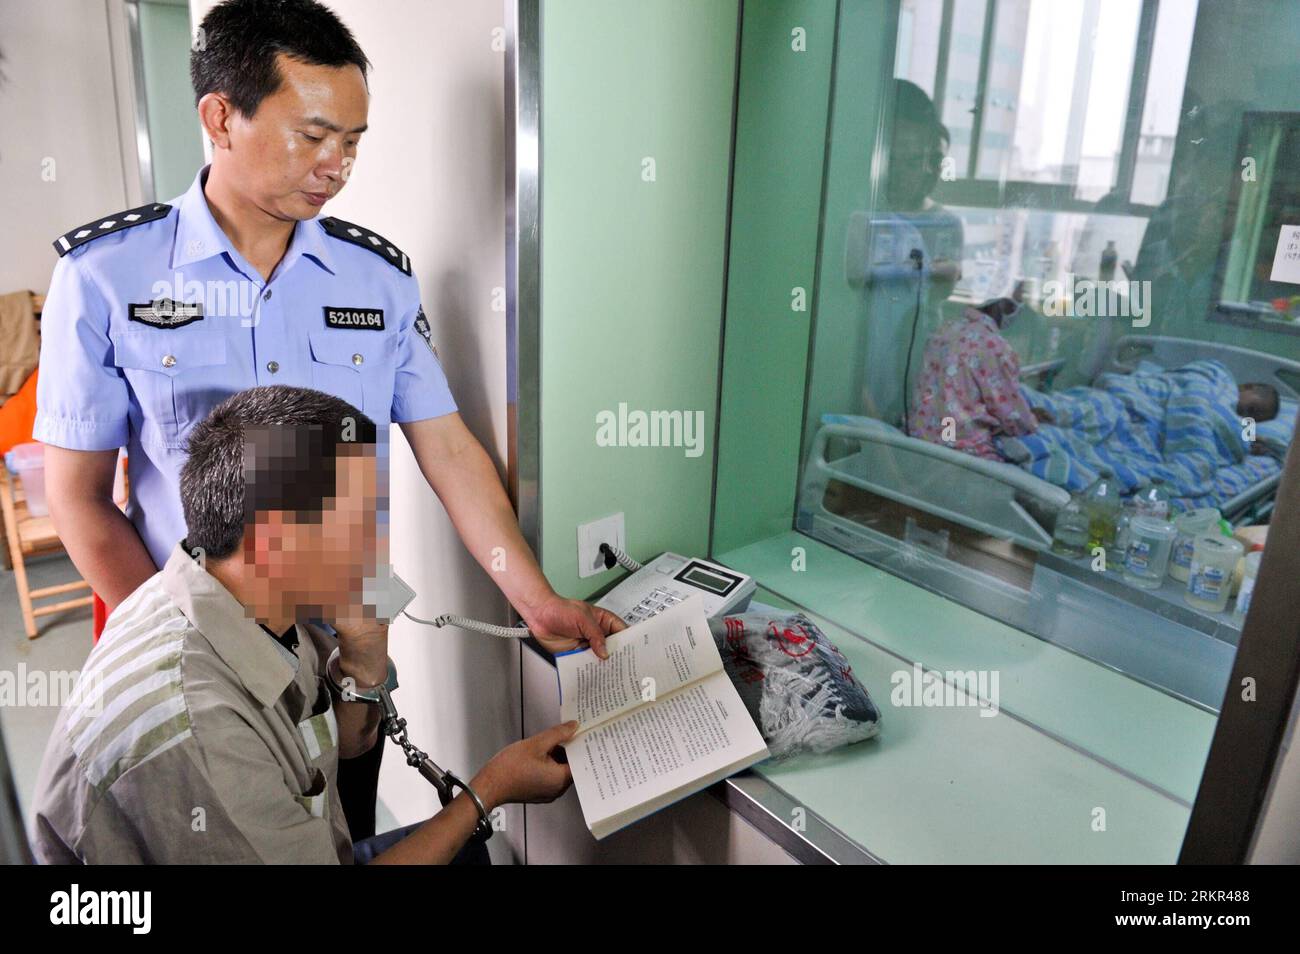 Bildnummer: 58115355  Datum: 18.06.2012  Copyright: imago/Xinhua (120618) -- CHONGQING, June 18, 2012 (Xinhua) -- The prisoner father surnamed Gao (C) reads stories for his son through a phone outside the patient ward at Xinqiao Hospital in Chongqing, southwest China, June 12, 2012. A family is facing an anxious wait to see whether a bone marrow transplant, made possible by the incarcerated father s rare trans-provincial prison transfer, has saved their son s life. PUBLICATIONxNOTxINxCHN Gesellschaft Fotostory Leukämie Medizin Knochenmarkspende Stammzellen Stammzellentherapie Spende xjh x2x 20 Stock Photo